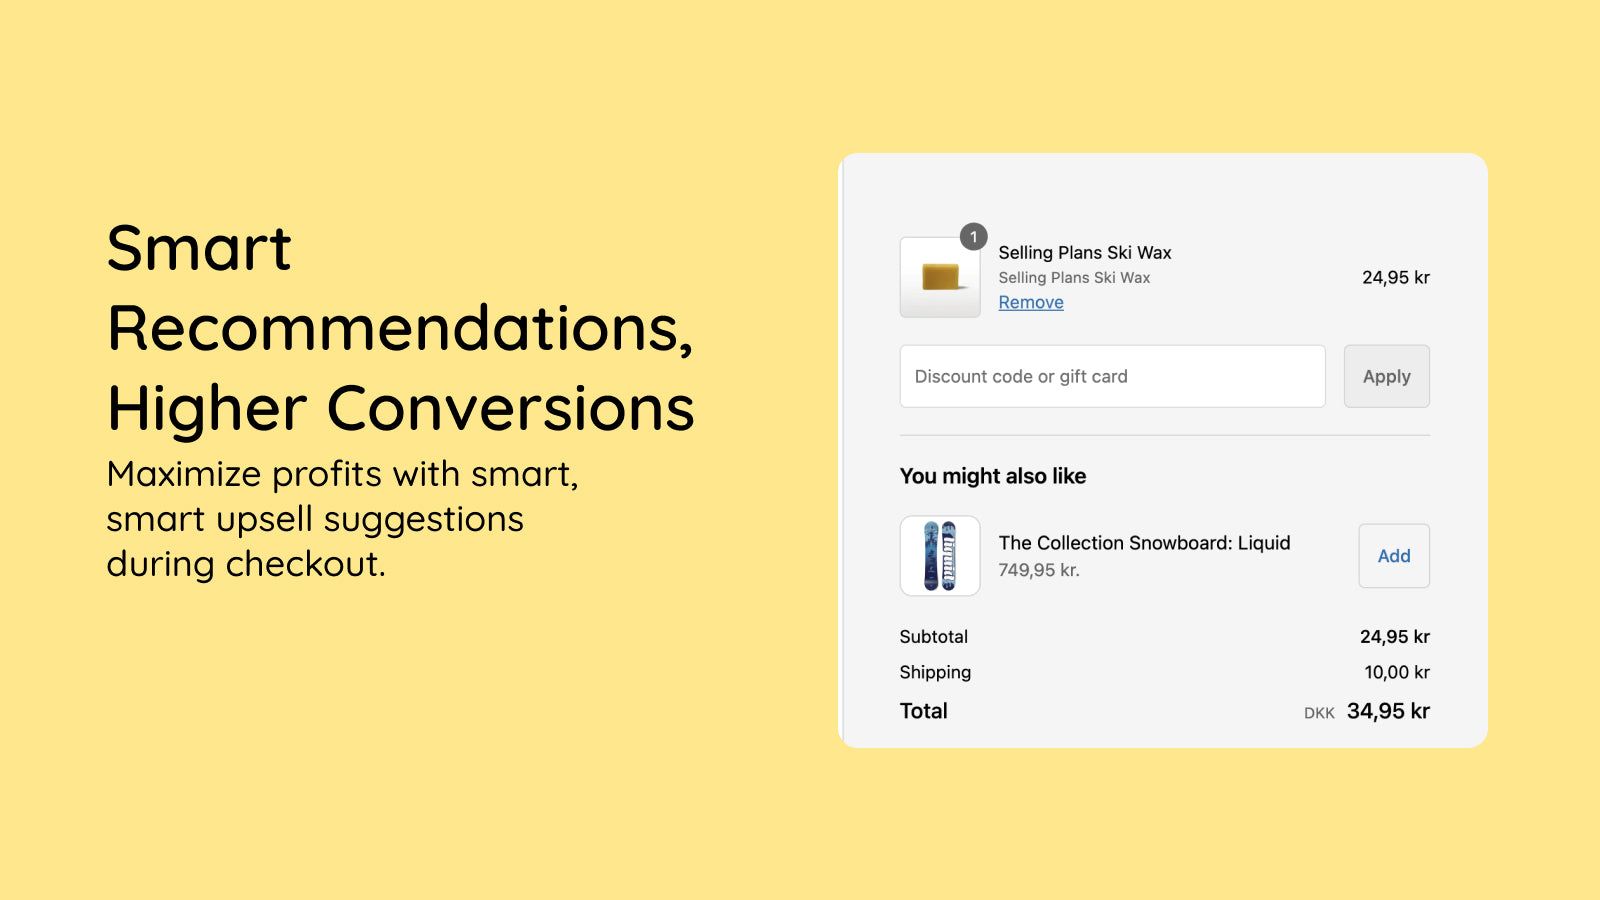 Smart Recommendations, Higher Conversions